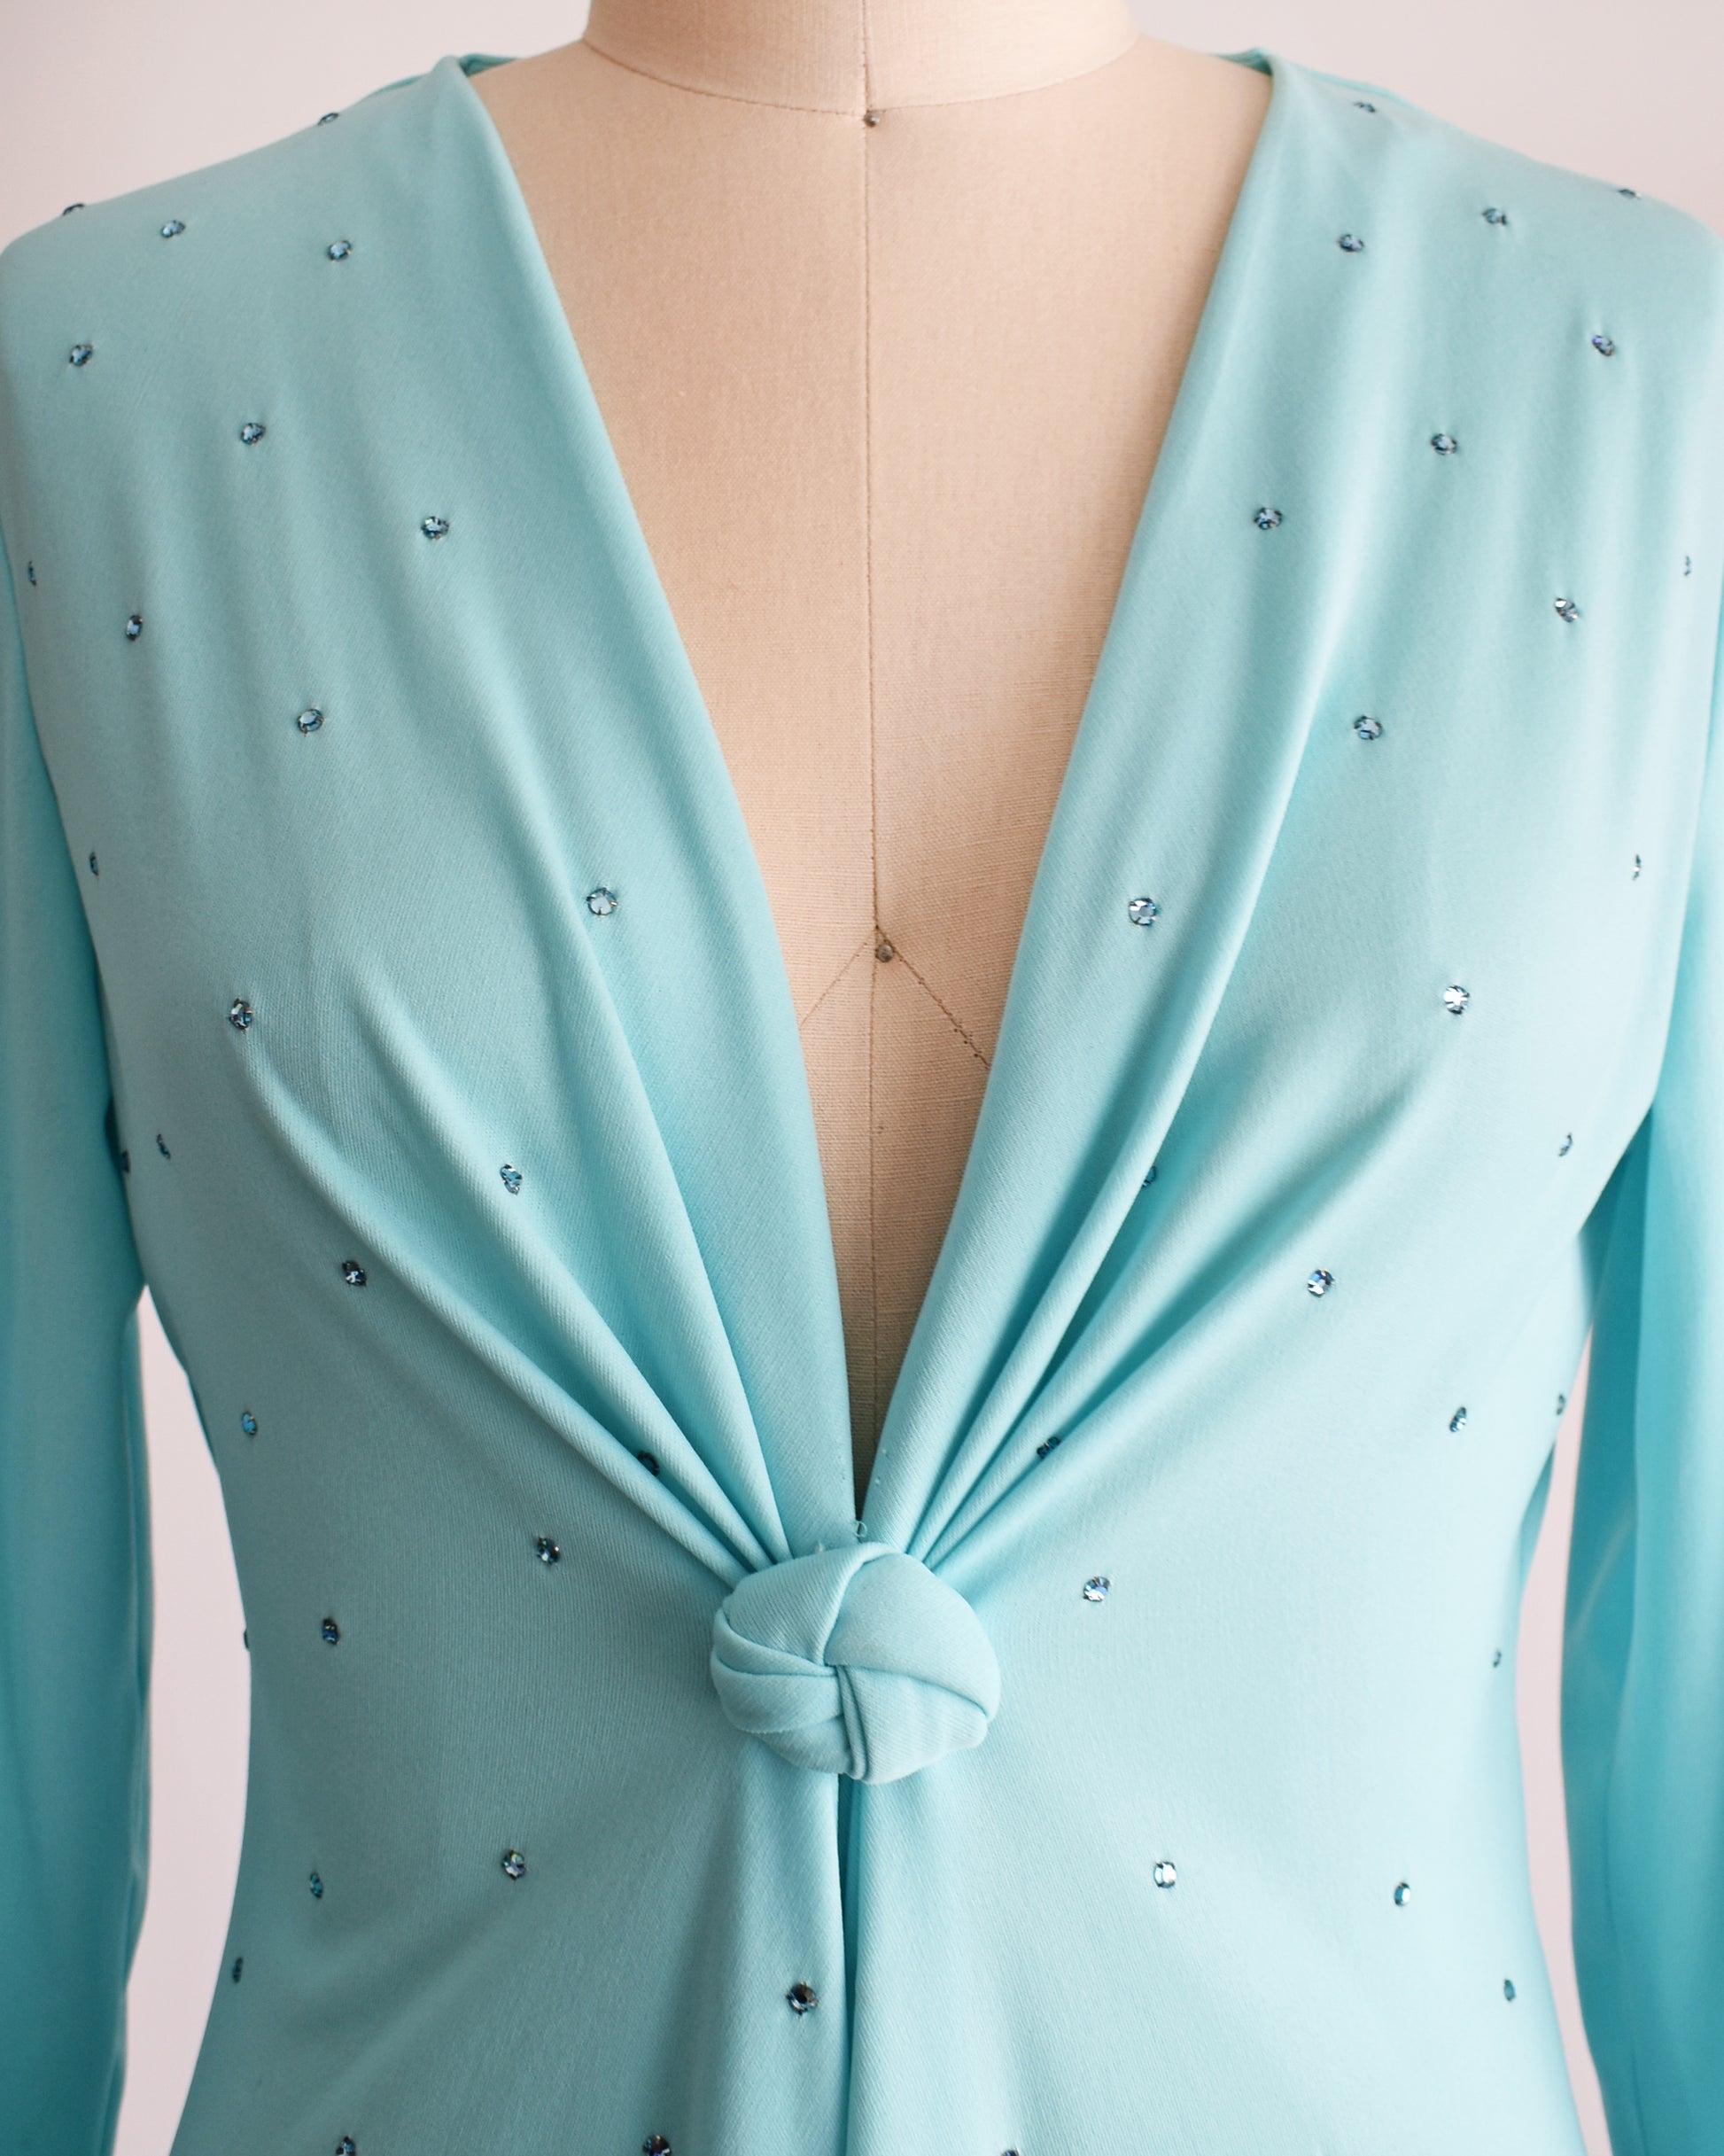 close up of the plunging neckline, rhinestones, and decorative knot